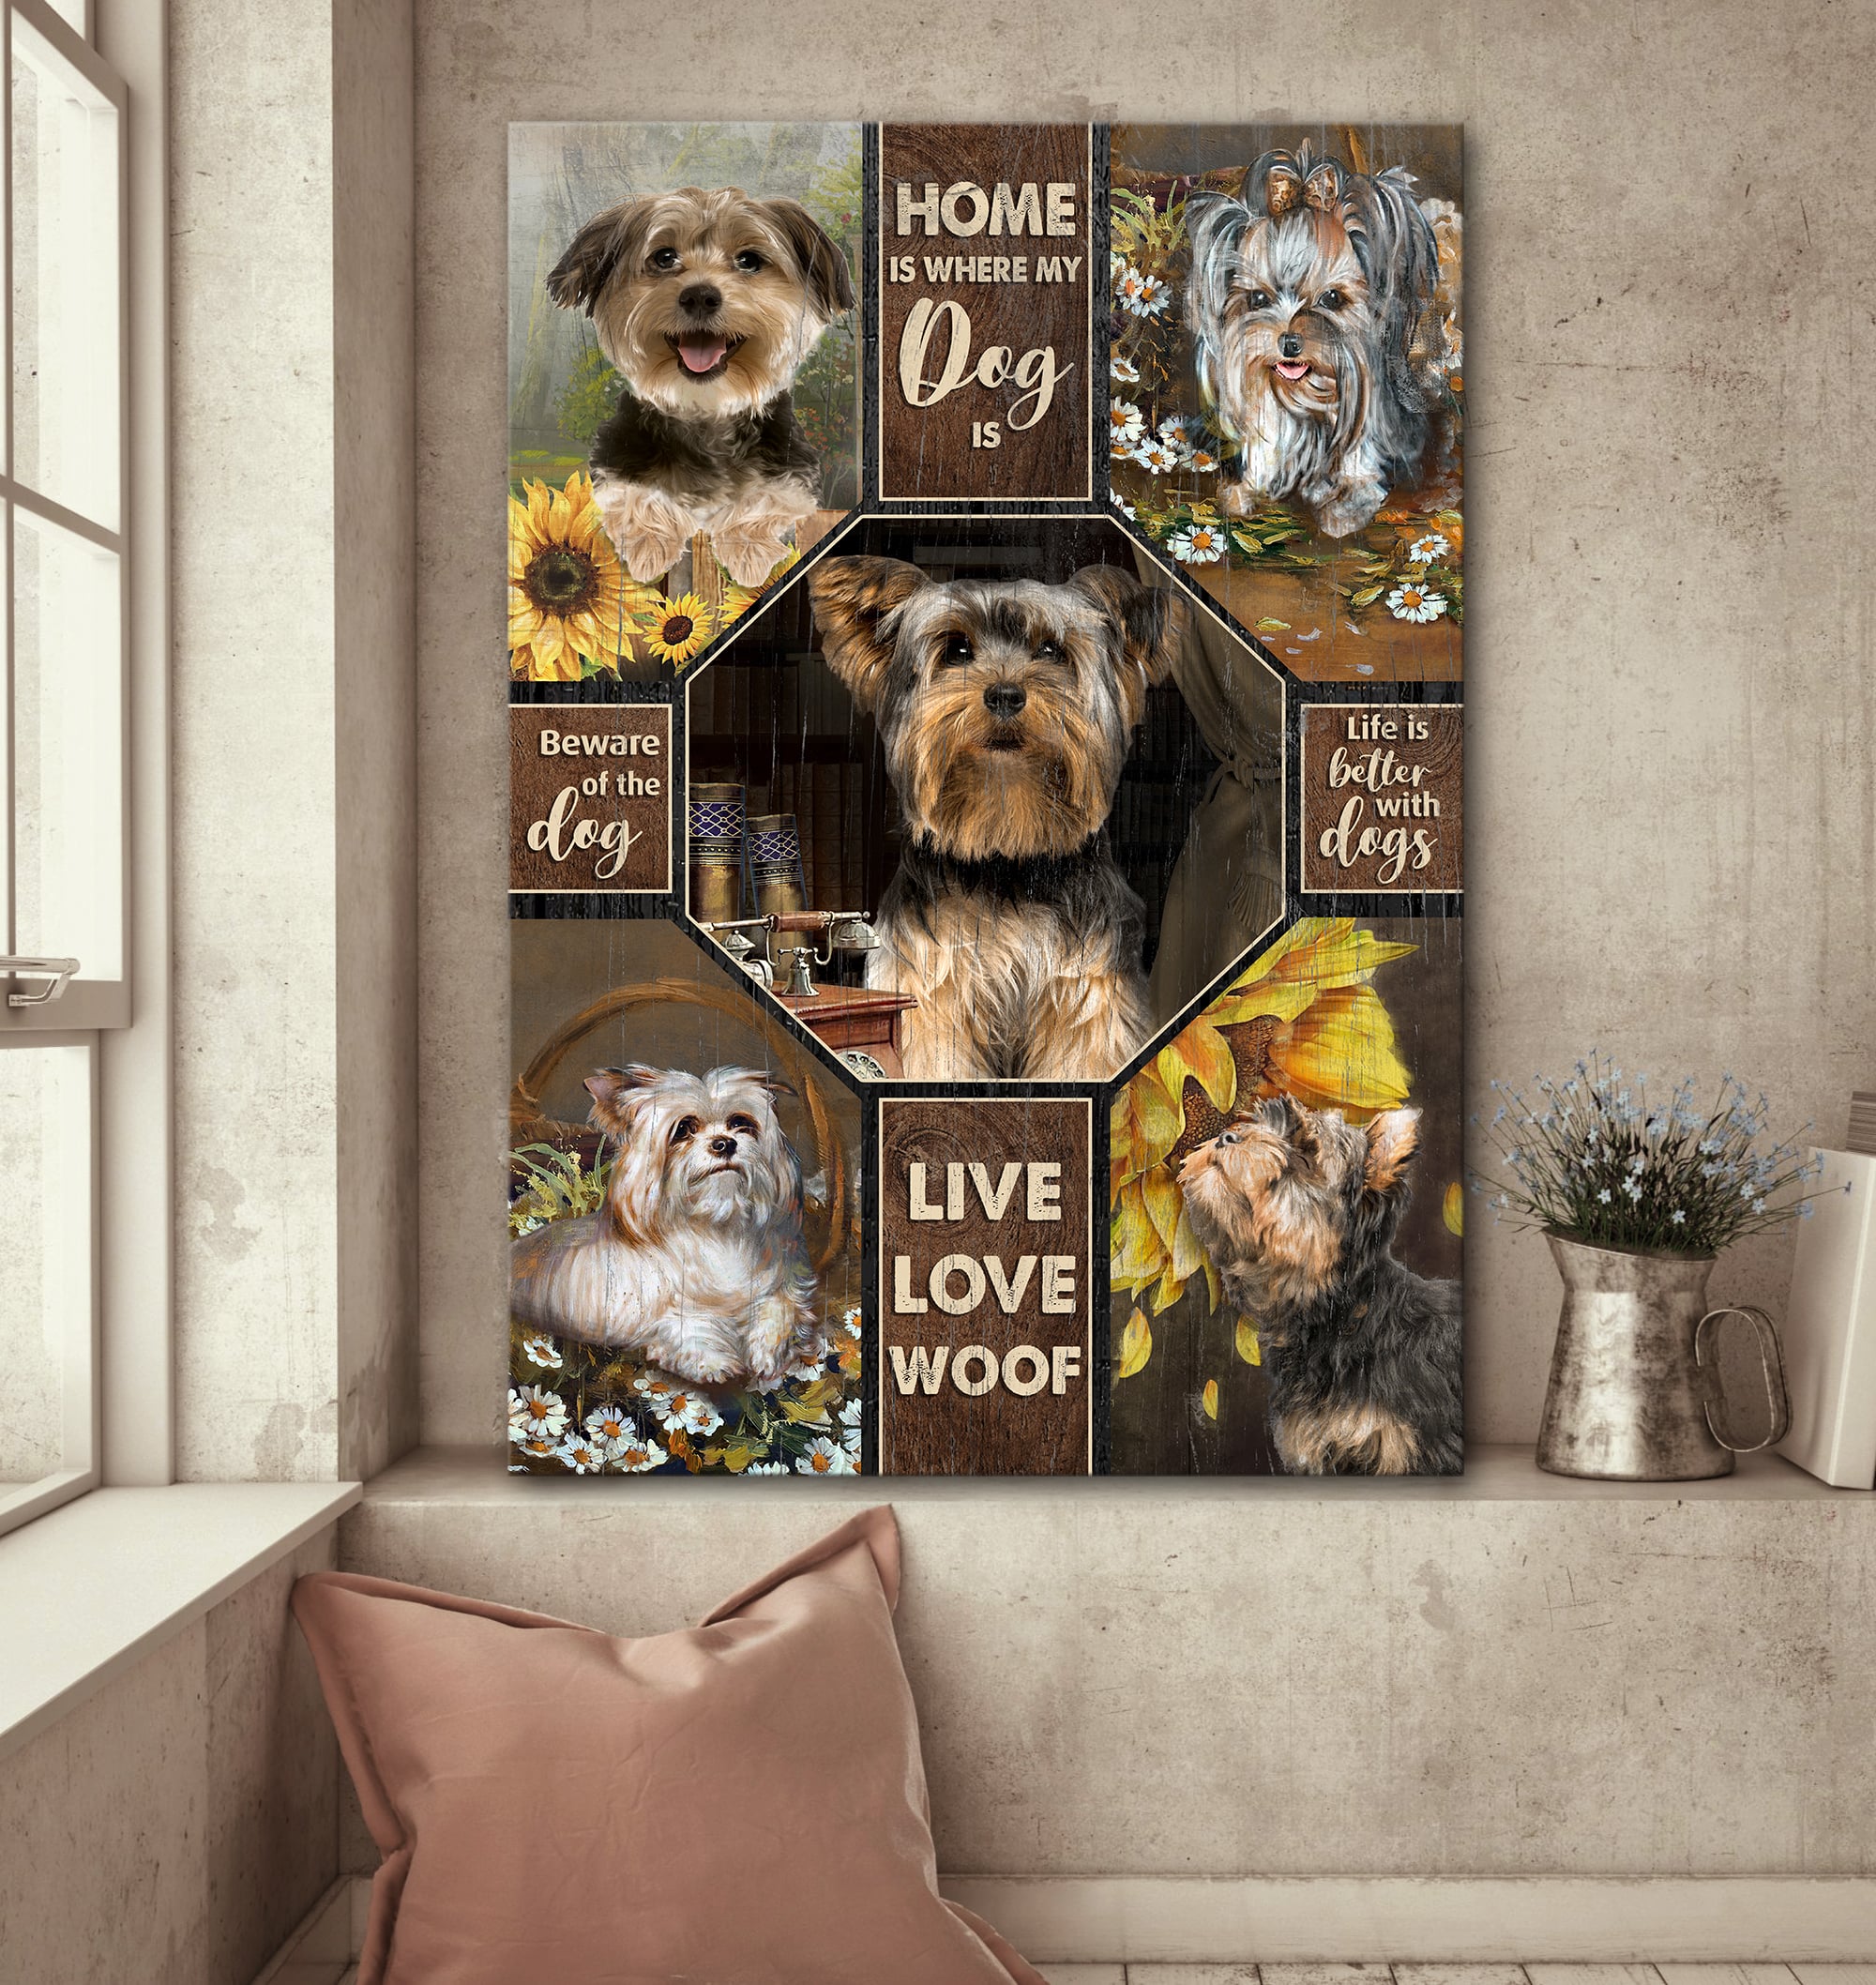 Yorkshire Terrier, Live Love Woof, Home is where my dog is - Dog Portrait Canvas Prints, Wall Art